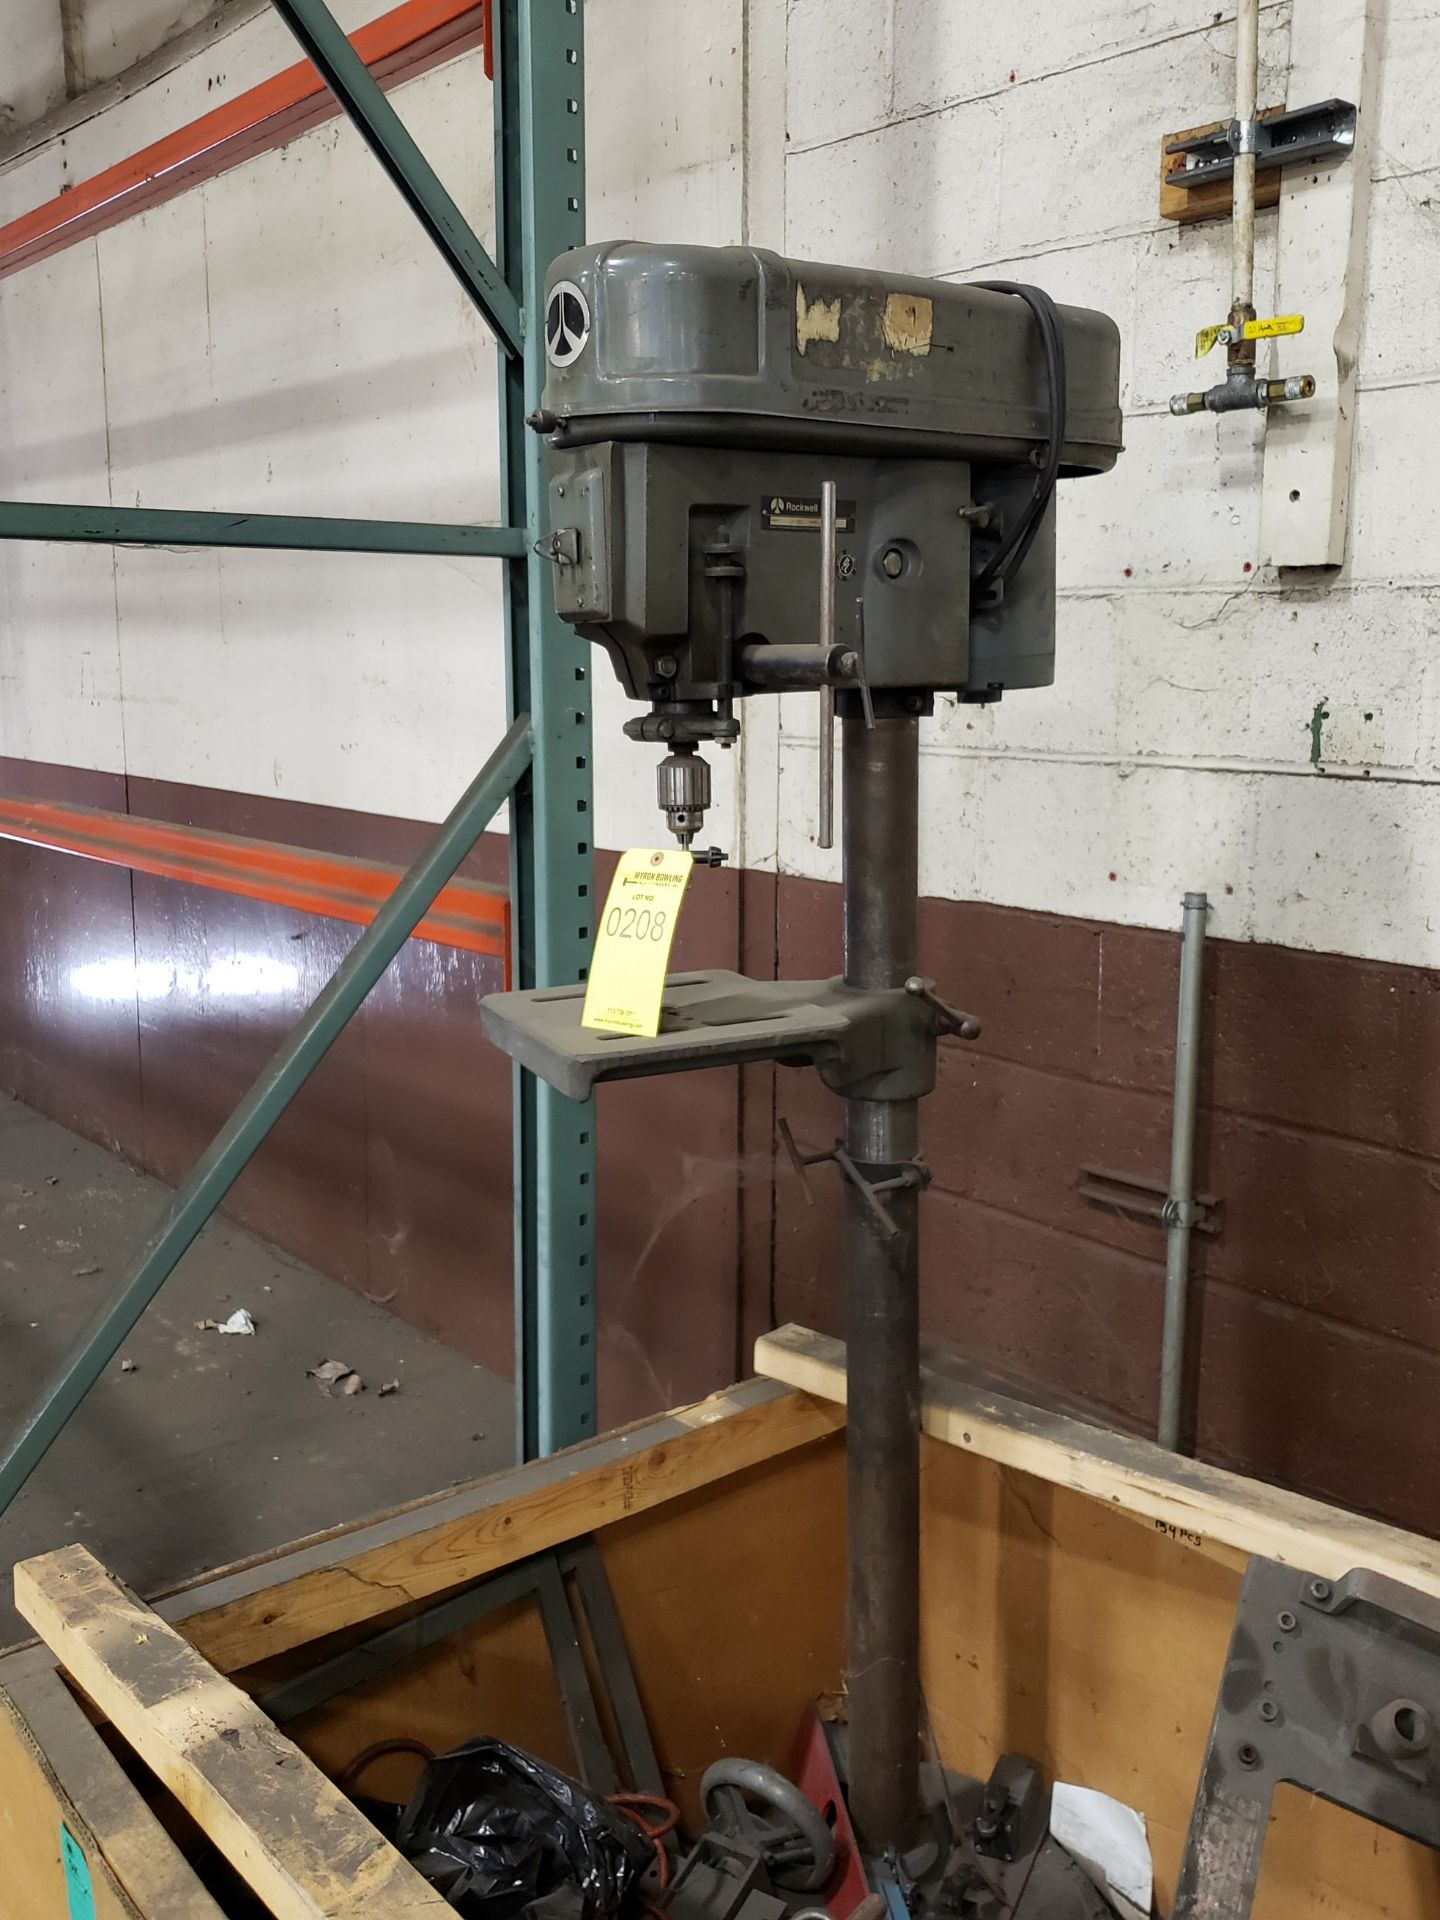 ROCKWELL PEDESTAL DRILL PRESS 4-SPEED, 120V, SERIES NO. 15-081, S/N 1683995 - Image 2 of 4